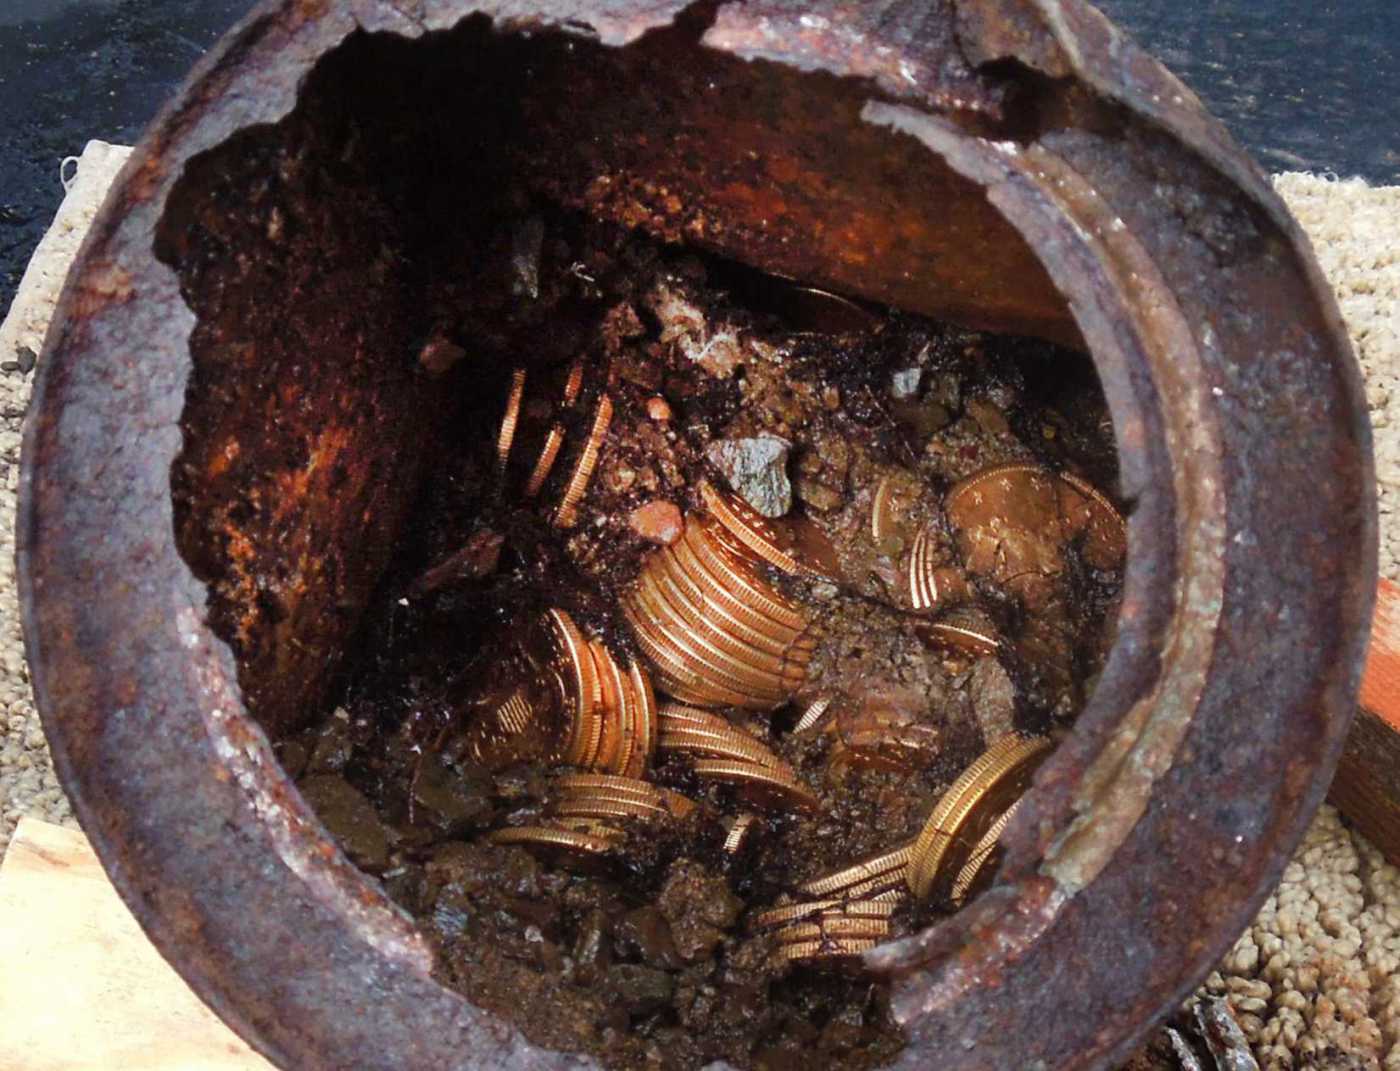 This image provided by the Saddle Ridge Hoard discoverers via Kagin's, Inc., shows one of the six decaying metal canisters filled with 1800s-era U.S. gold coins unearthed in California by two people who want to remain anonymous. (Saddle Ridge Hoard discoverers—Kagin's, Inc./AP)